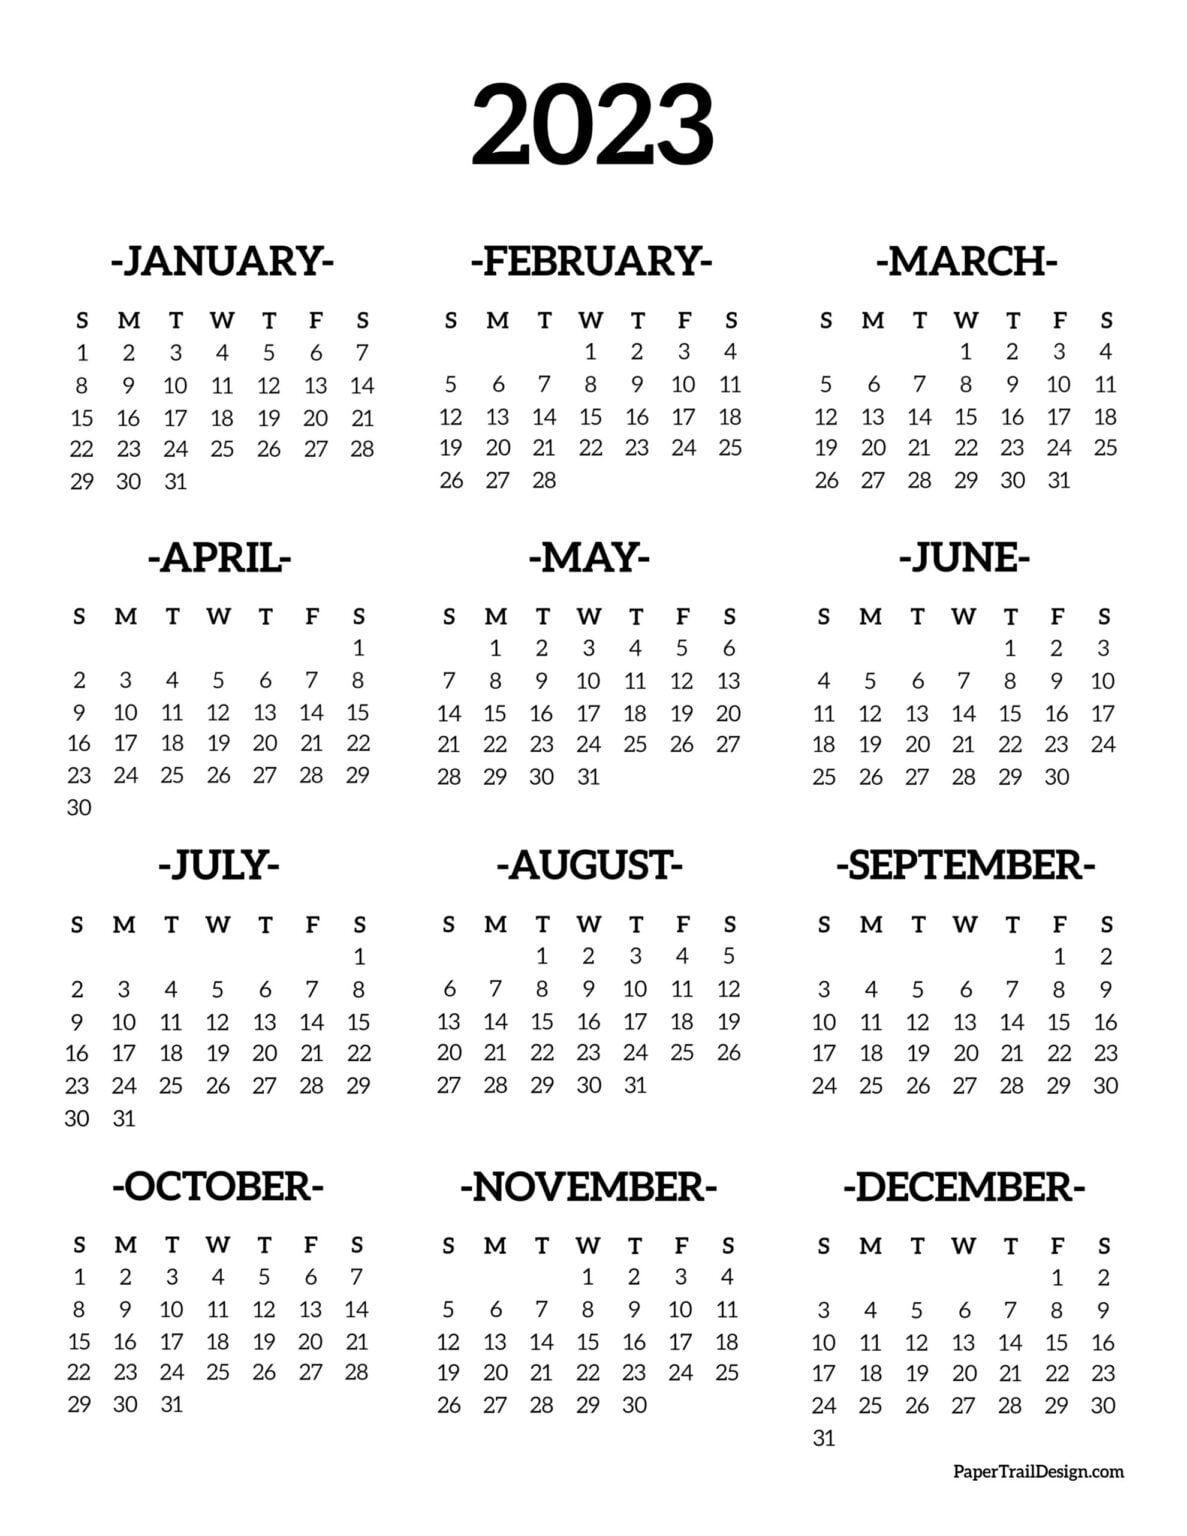 Calendar 2023 Printable One Page Paper Trail Design - Schedule Printable